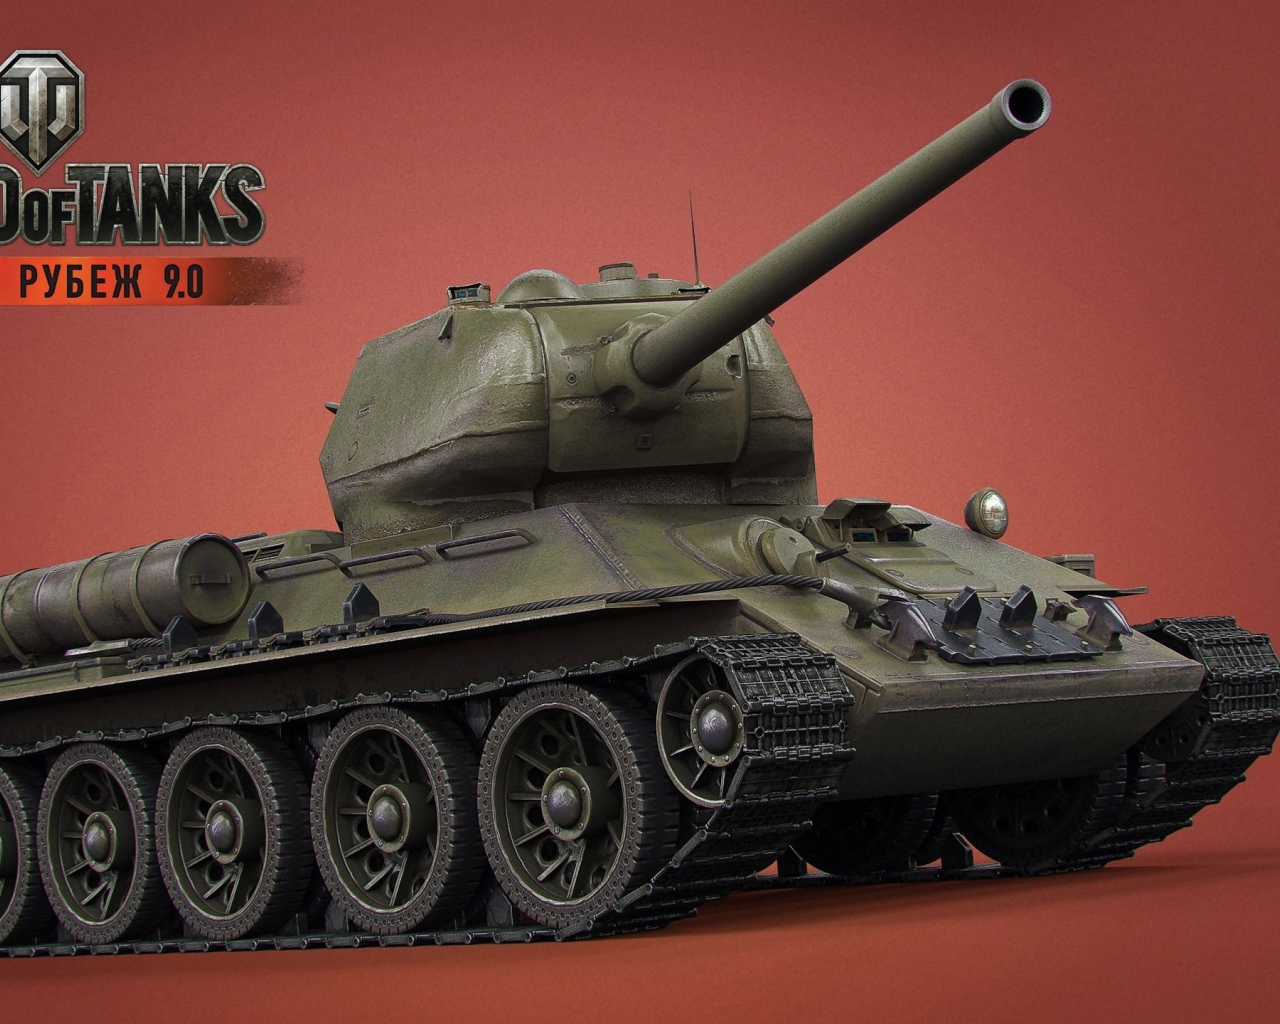 The game World of Tanks, T-34 tank